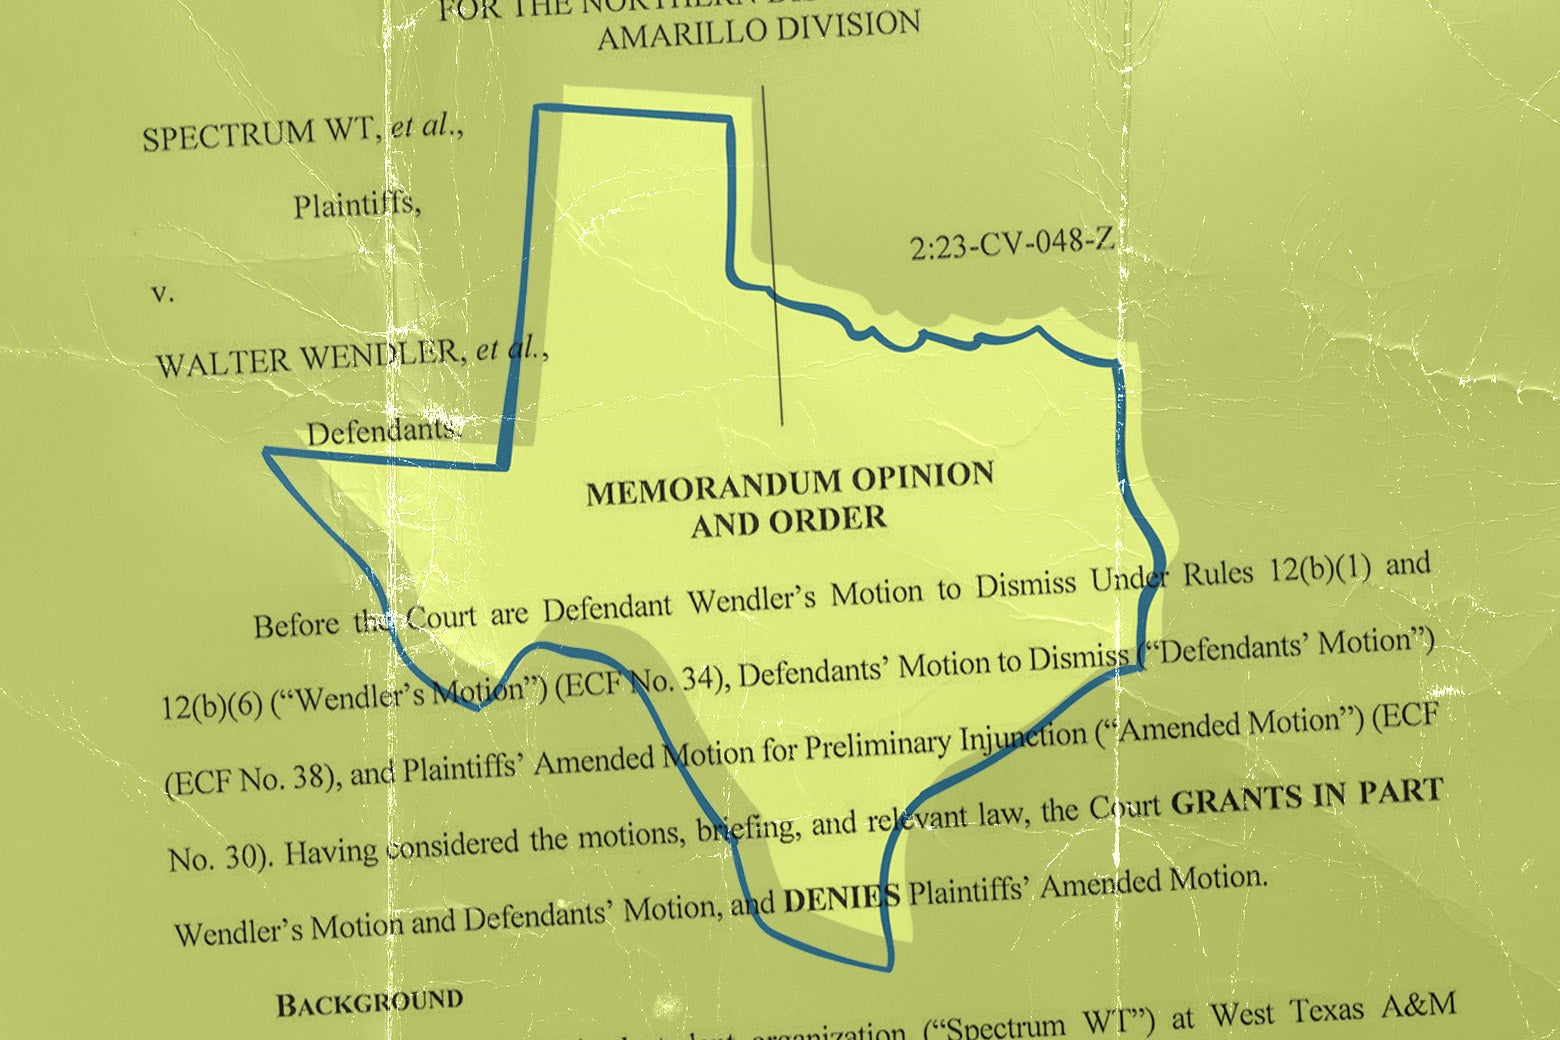 A page from Judge Matthew Kacsmaryk's opinion superimposed on the outline of the state of Texas.